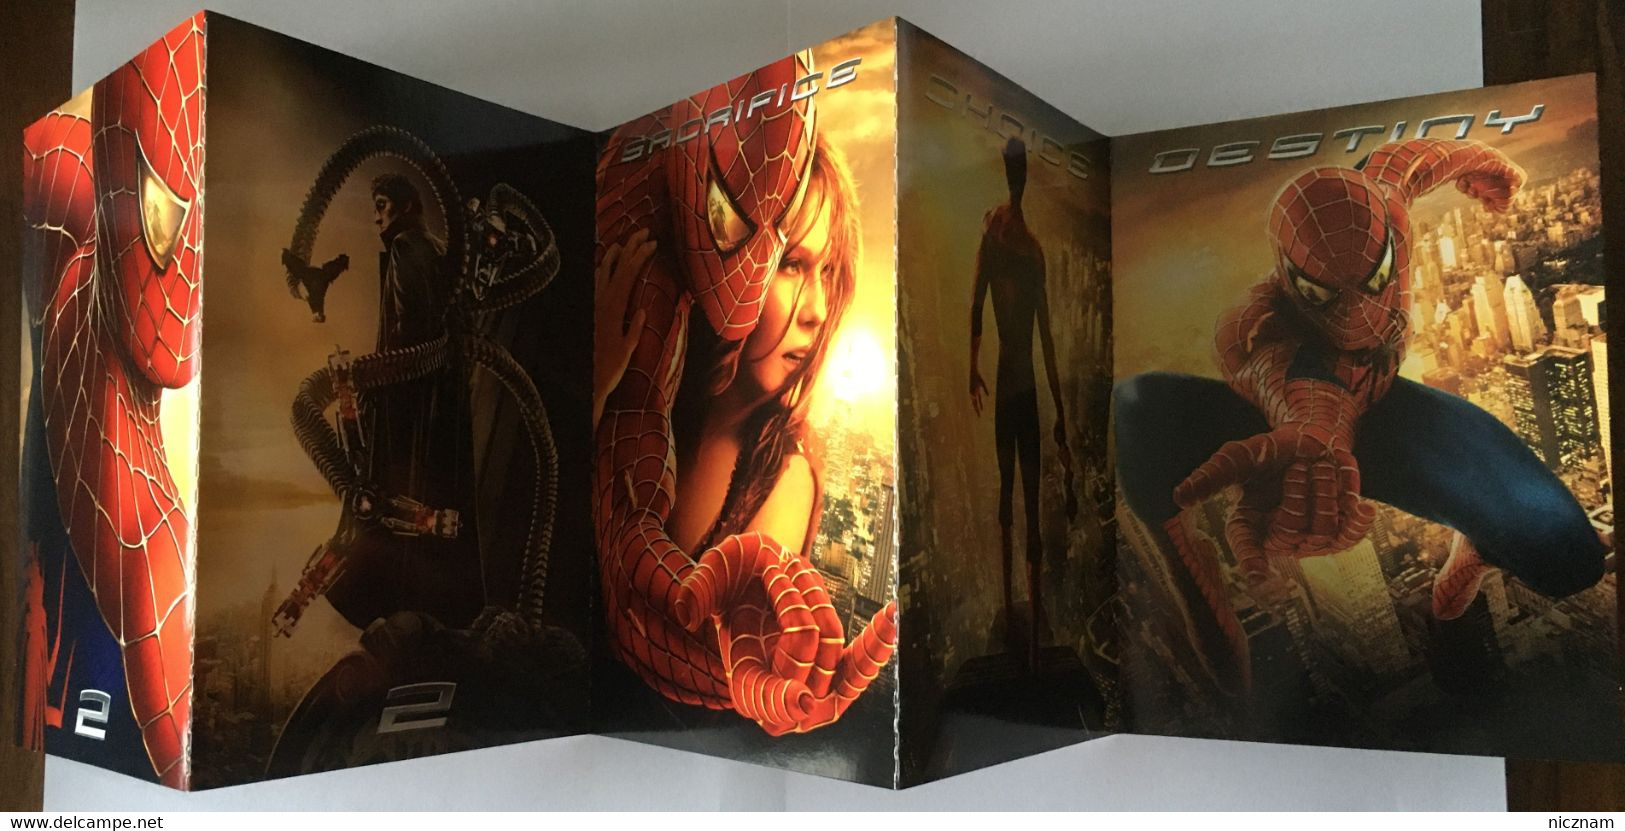 DVD SPIDERMAN 2 - Collector's Limited Edition (Version IT) - Tirage limité - Exemplaire no 162